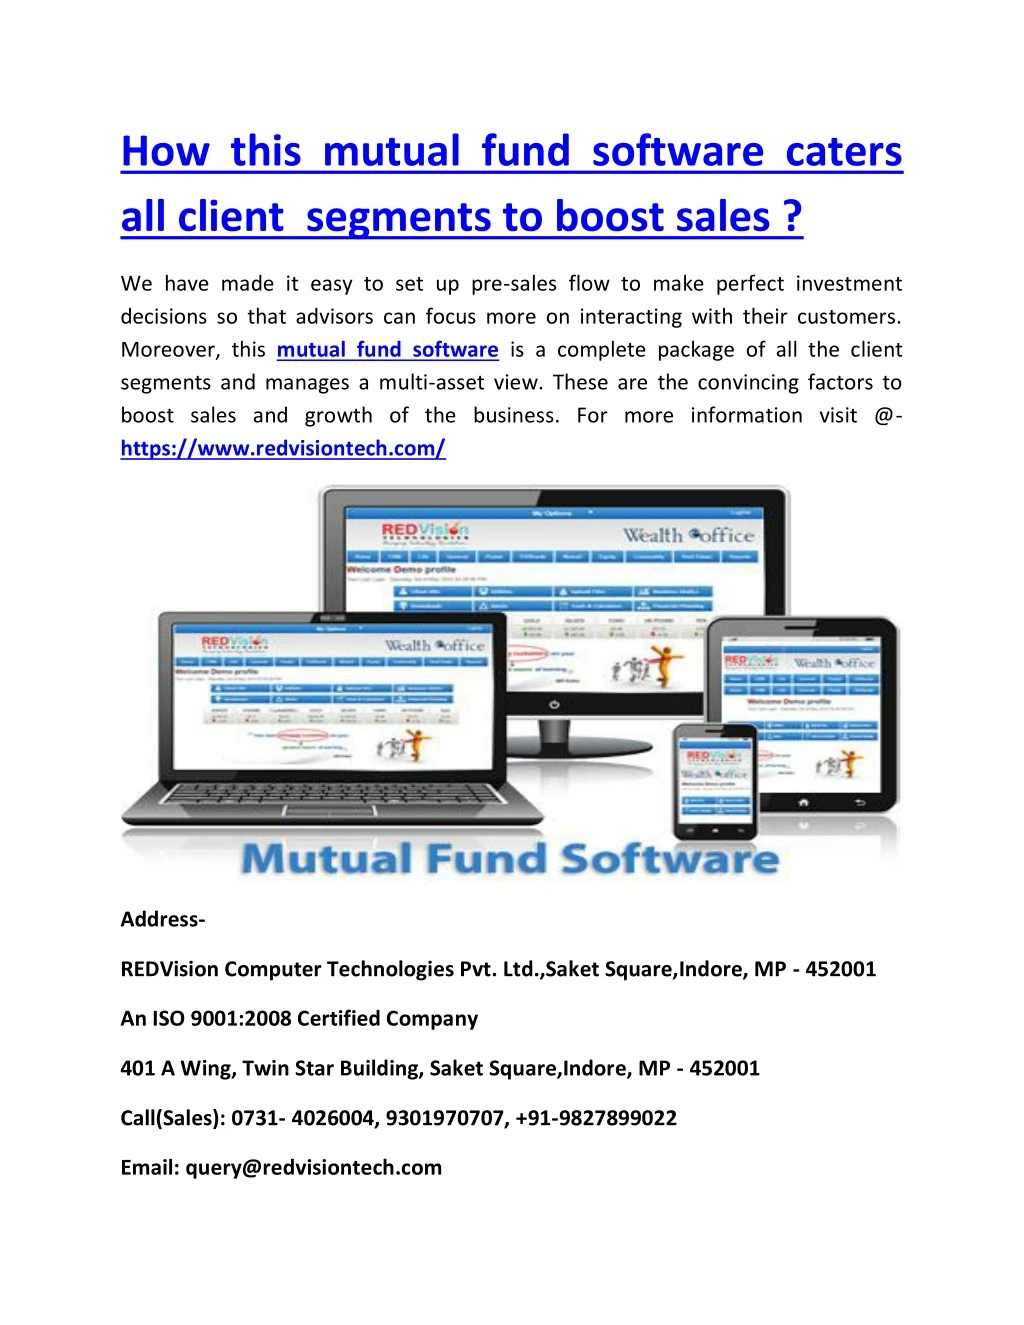 how this mutual fund software caters all client